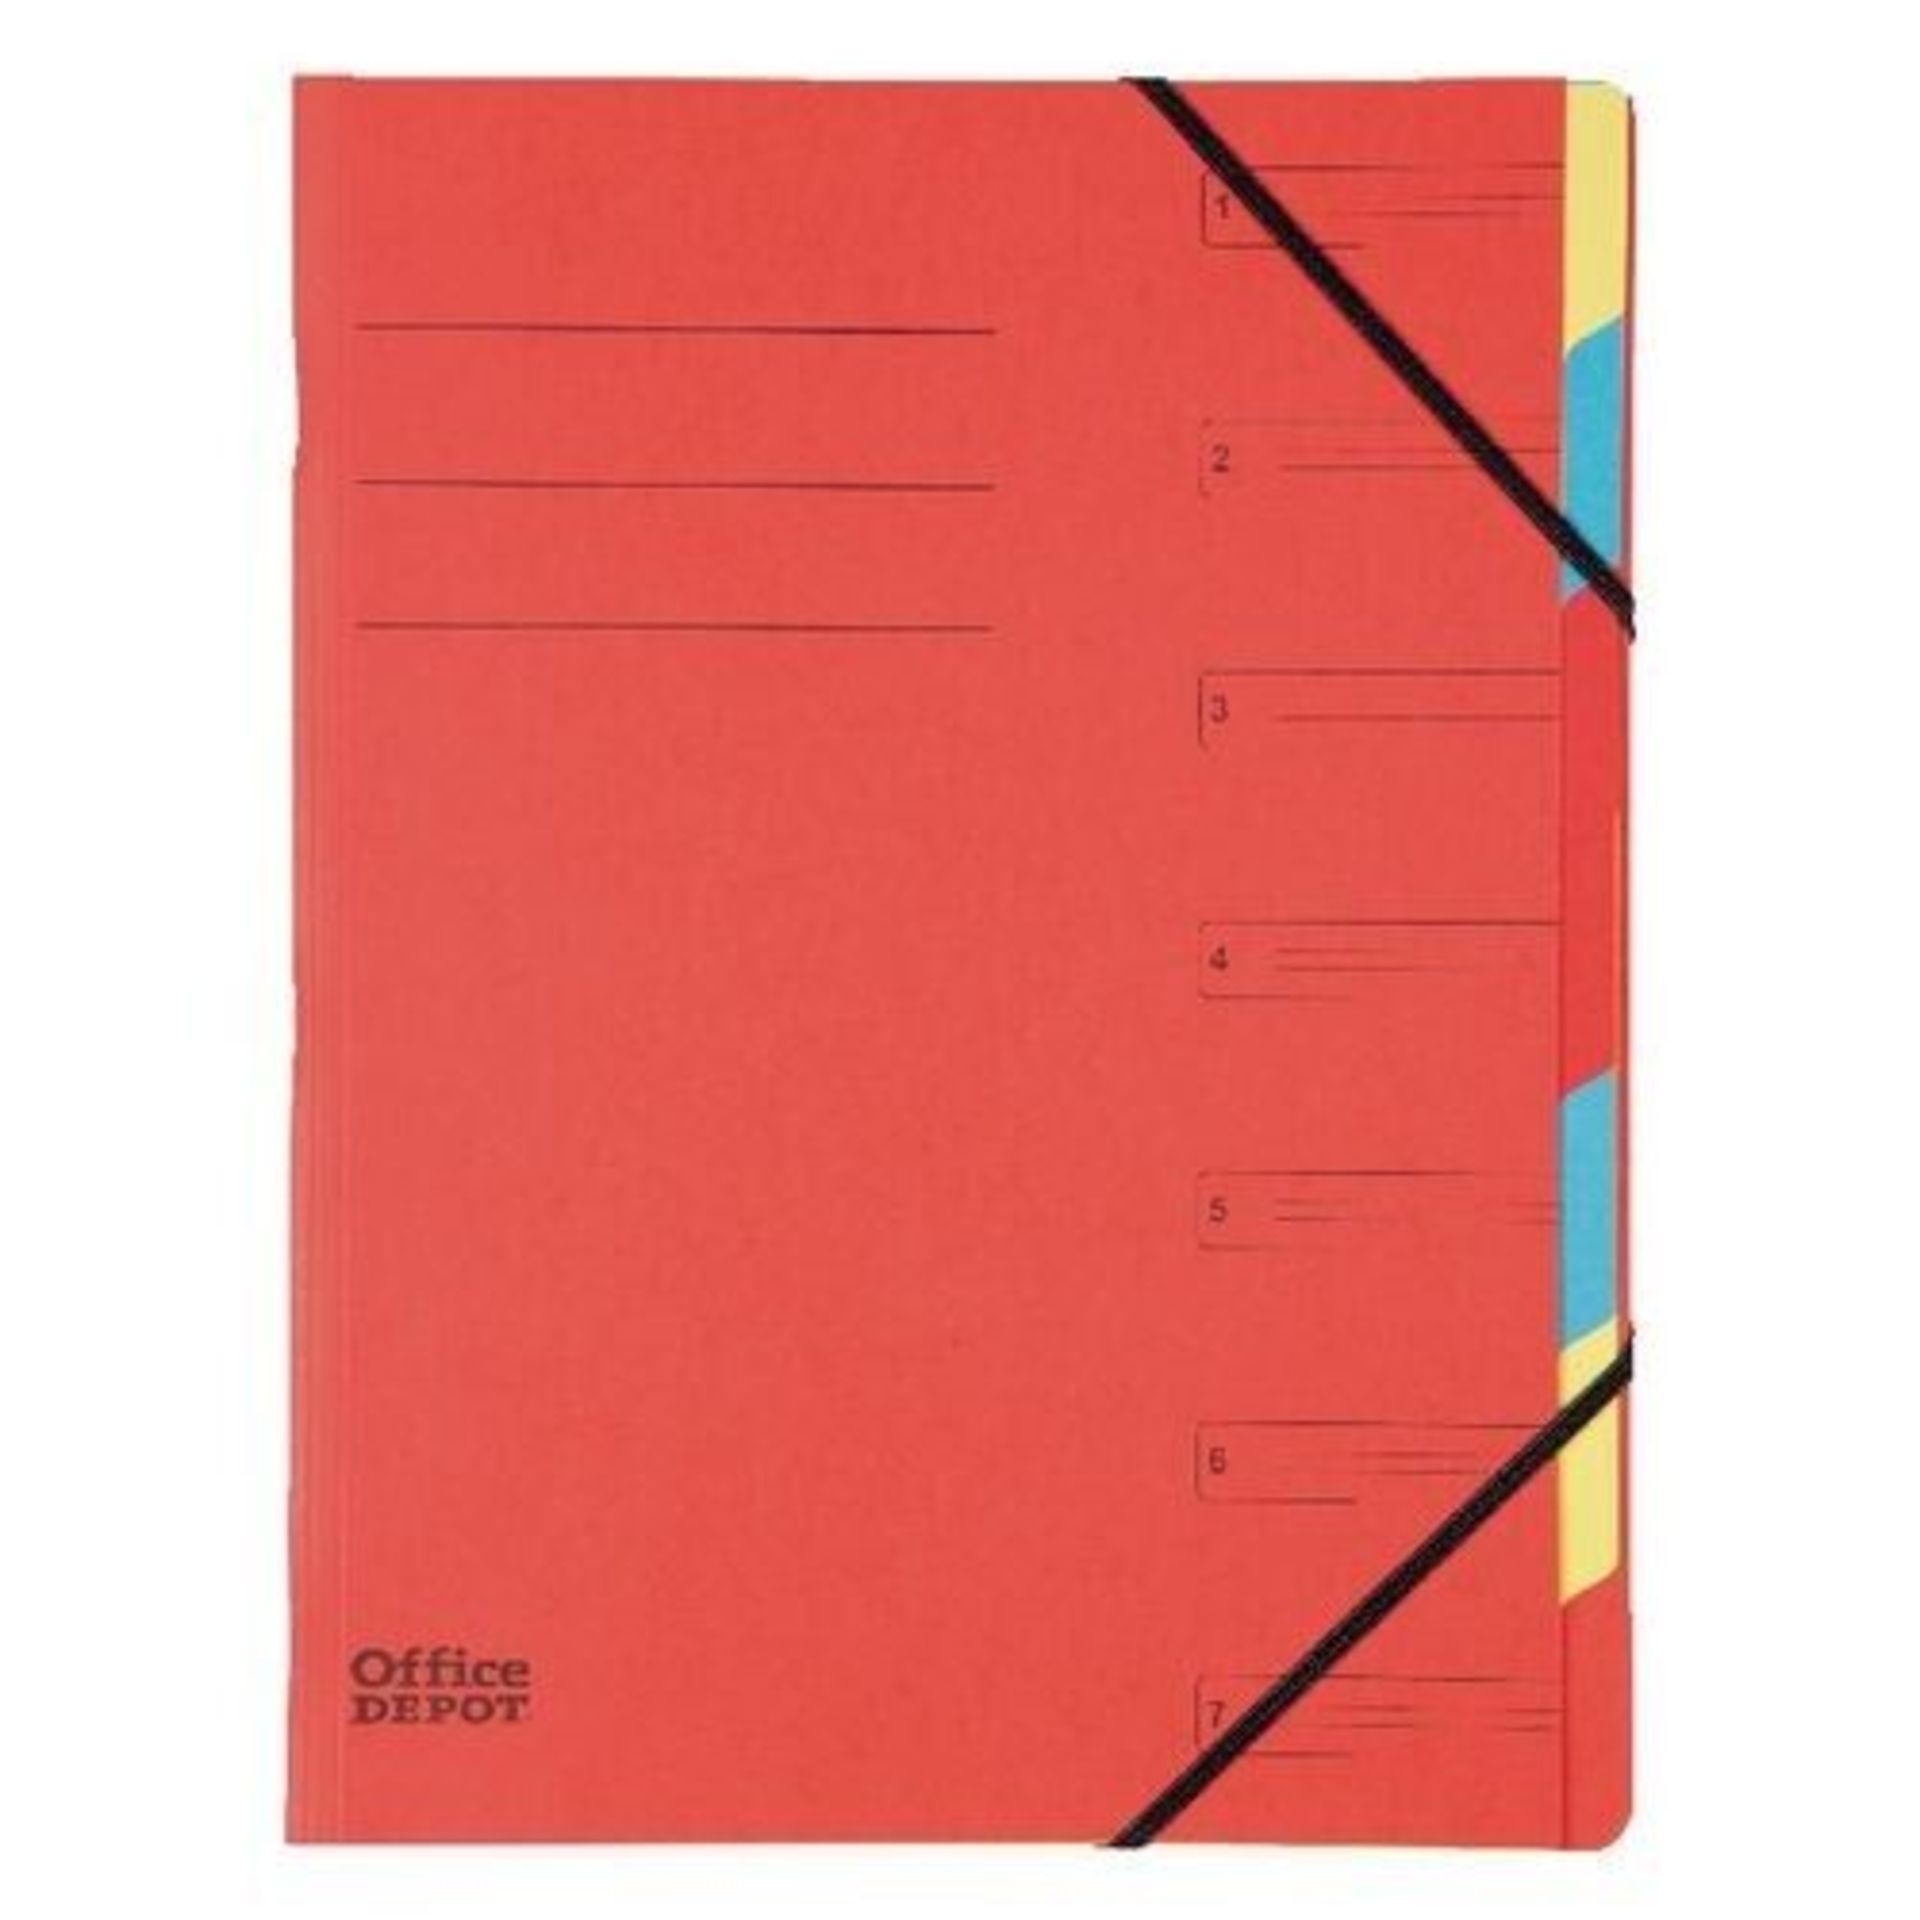 78 x A4 7 Part Files, Colour Tabbed,Elasticated, Stapled Spine, Red,